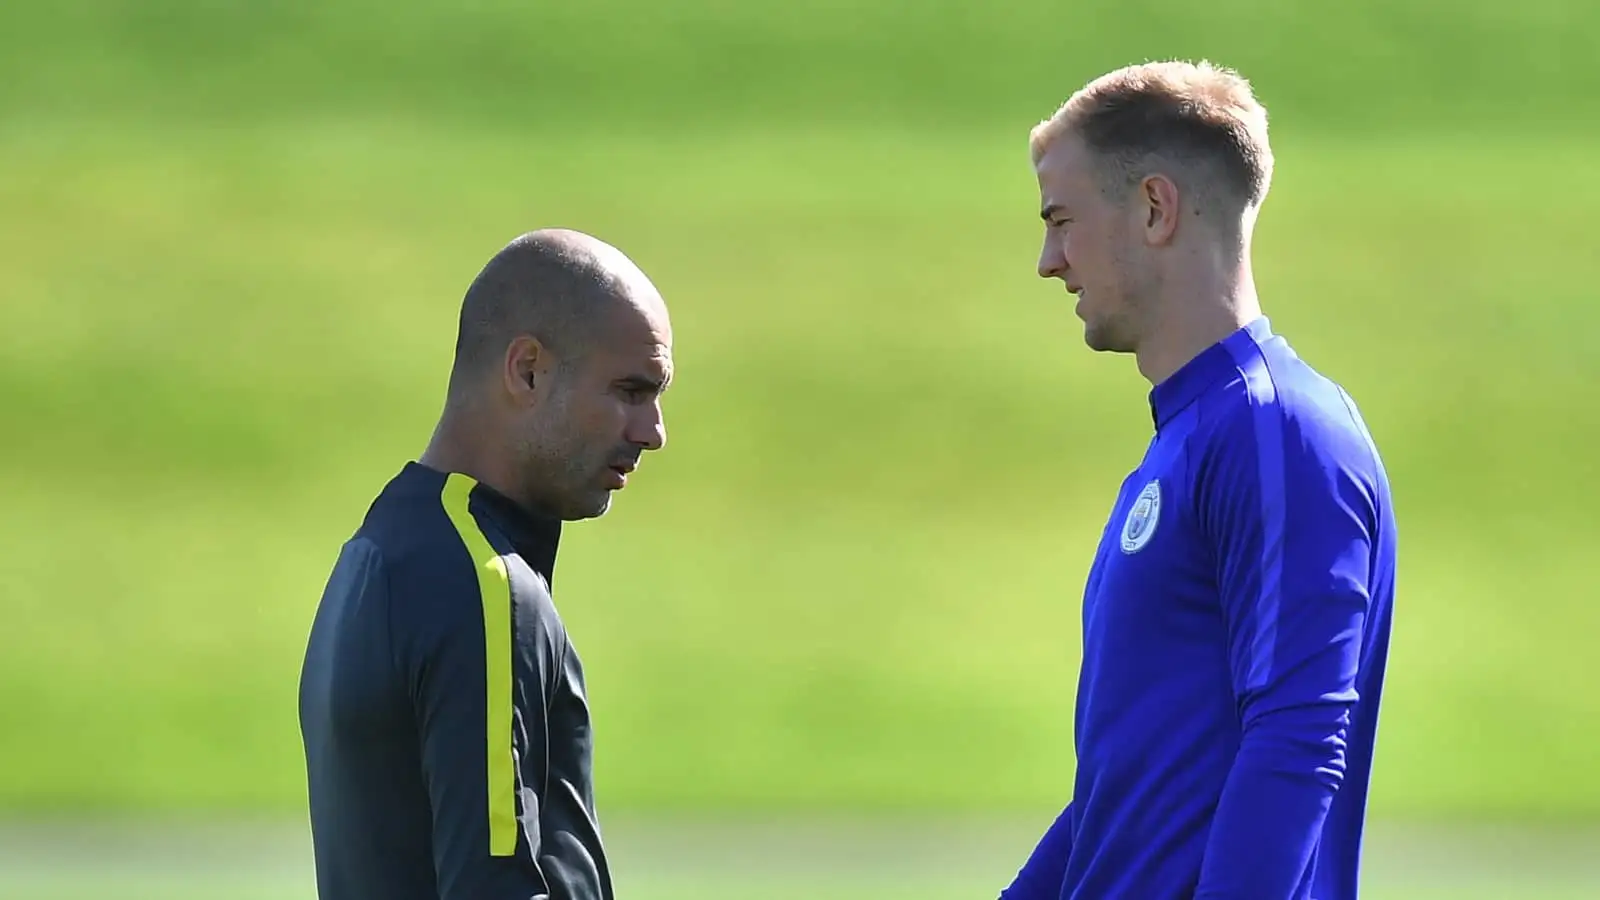 Joe Hart opens up on Man City exit, as emotional chat with Pep Guardiola revealed